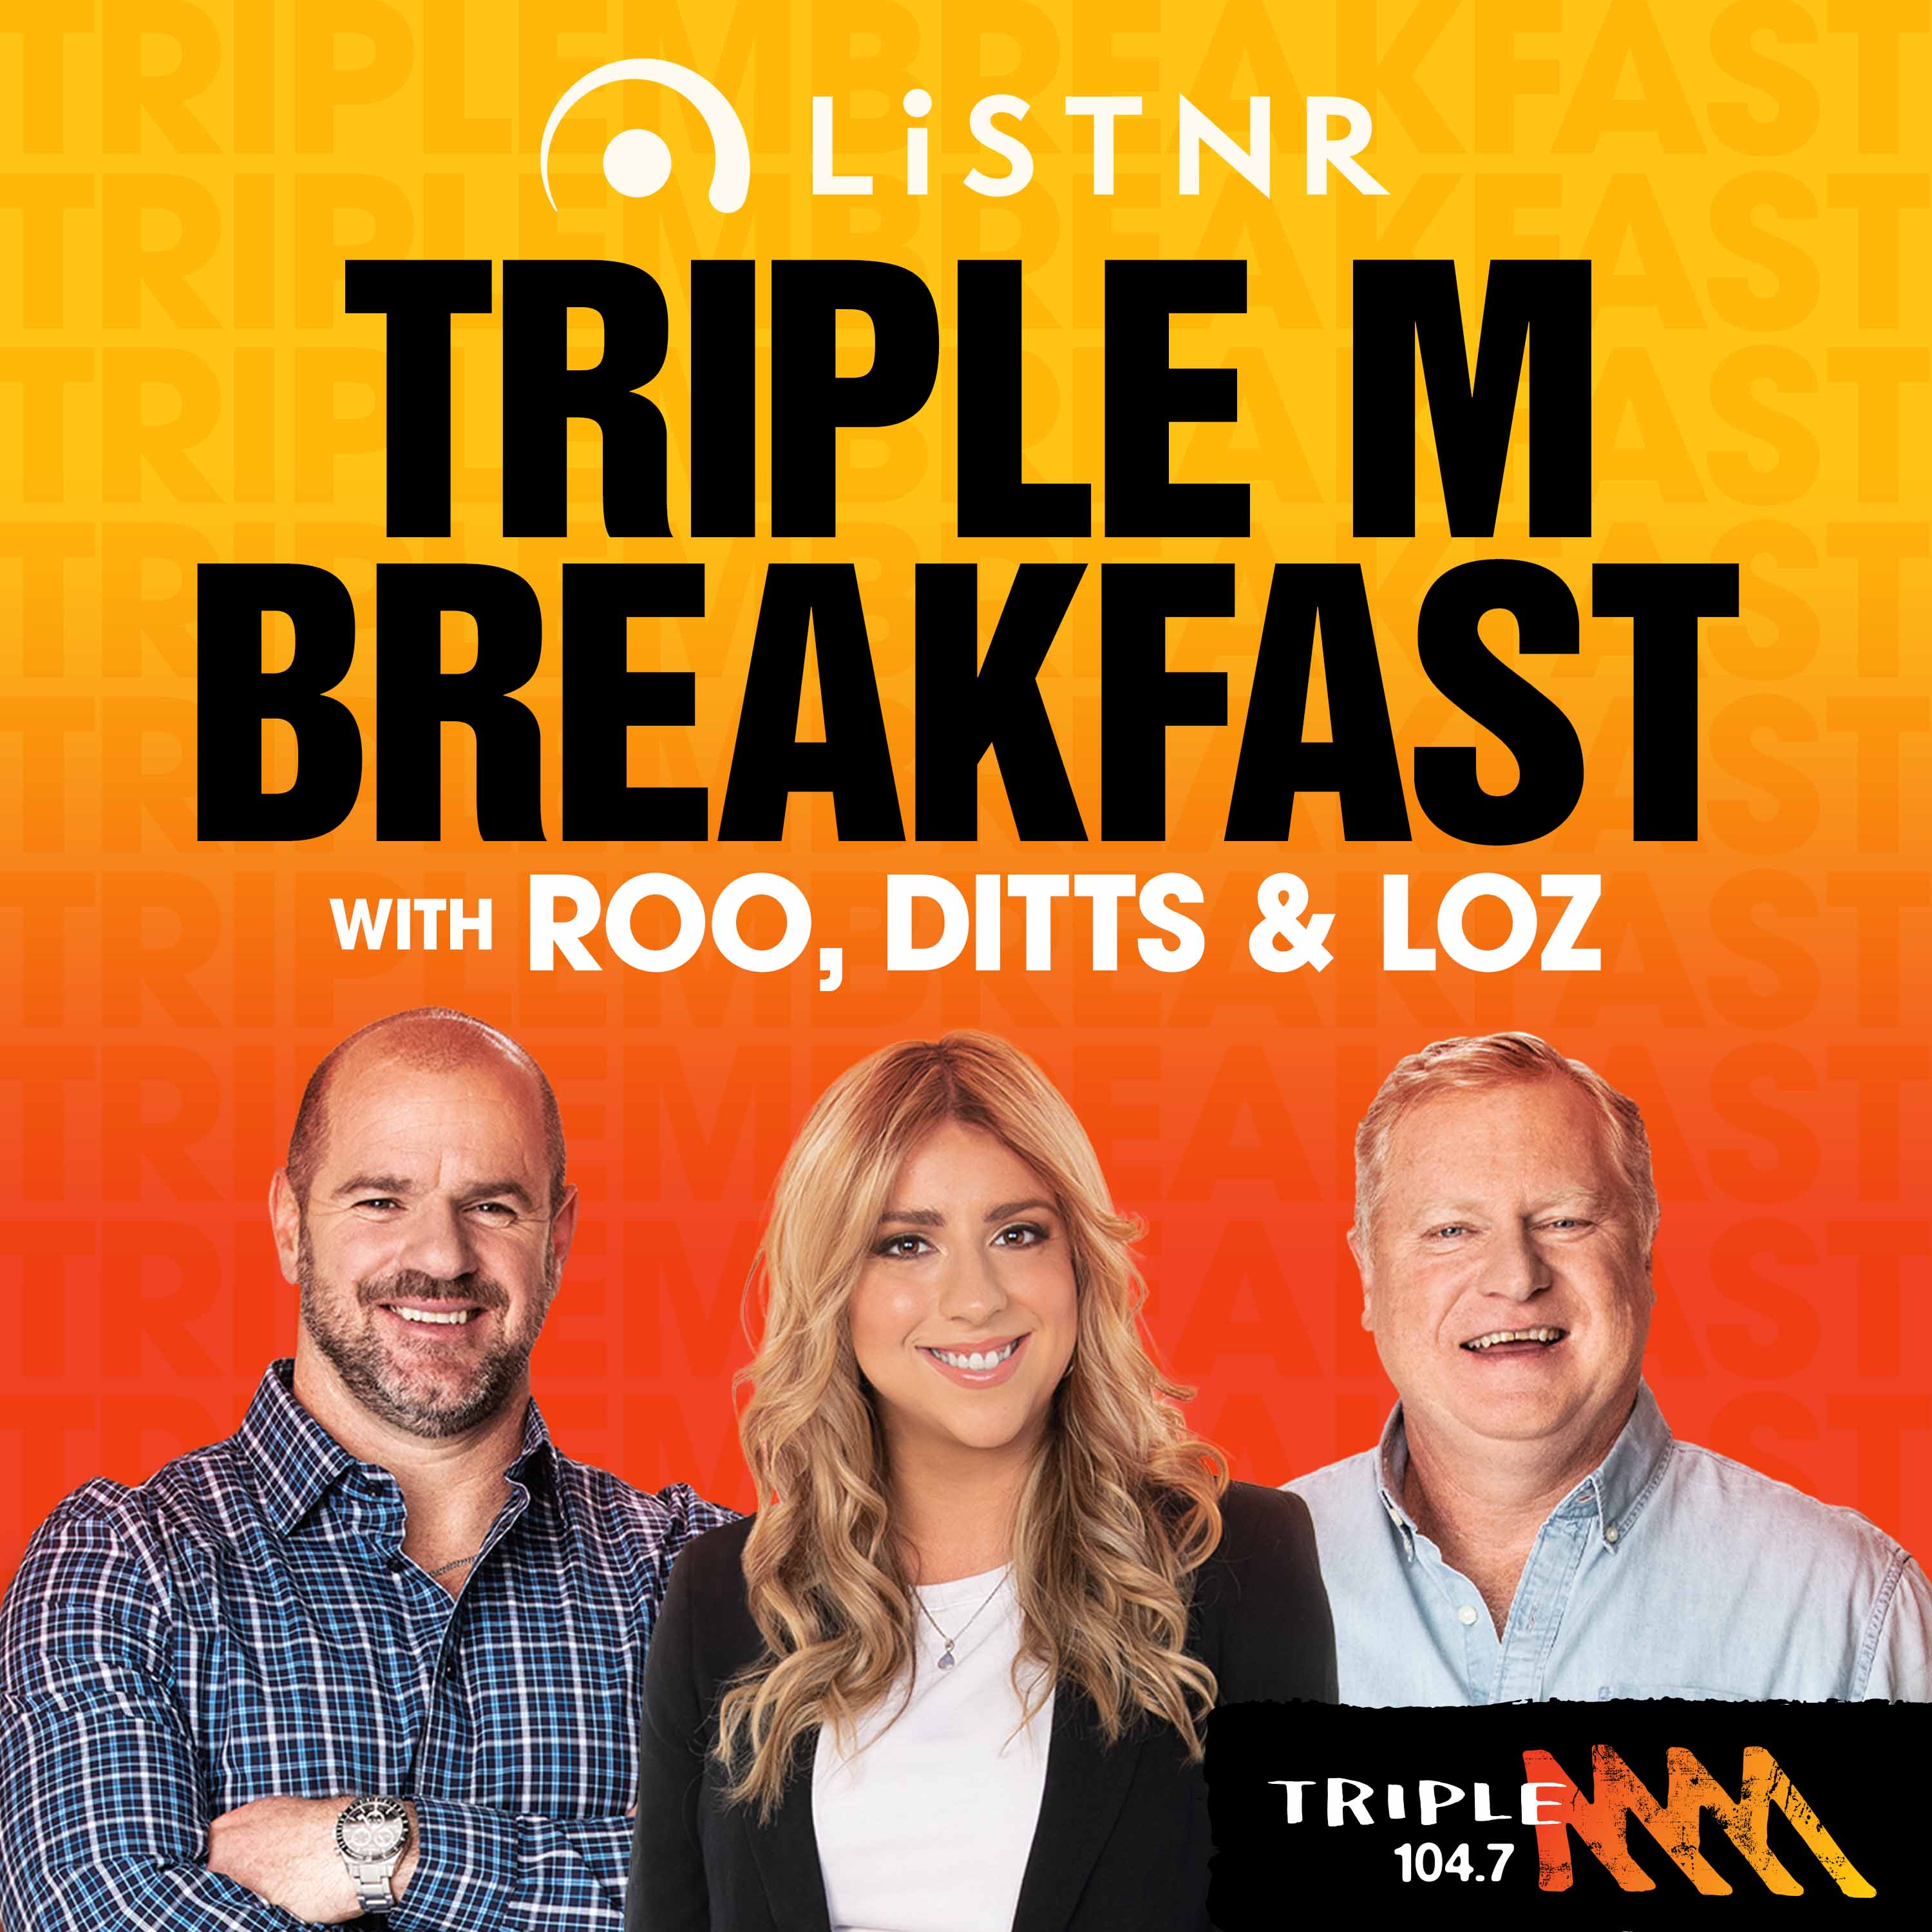 The Triple M boss shares some listener’s feedback to Roo And Ditts! Angels on if partners should be invited to your work Christmas party? Sounds of Australia registry, 10 new song inductions - Roo And Ditts For Breakfast Catch Up Podcast.